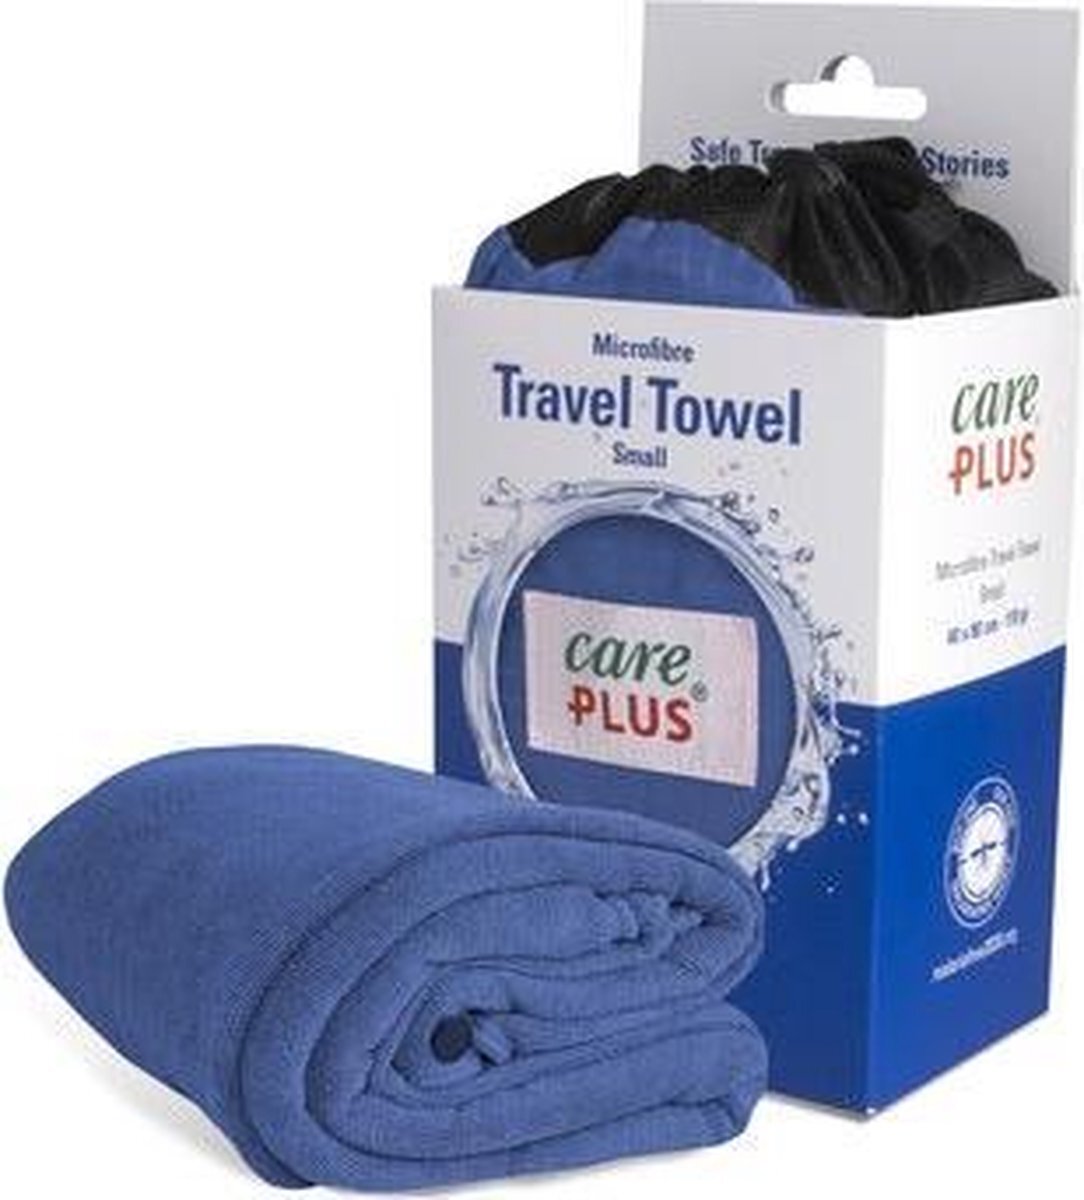 Care Plus Travel Towel Small